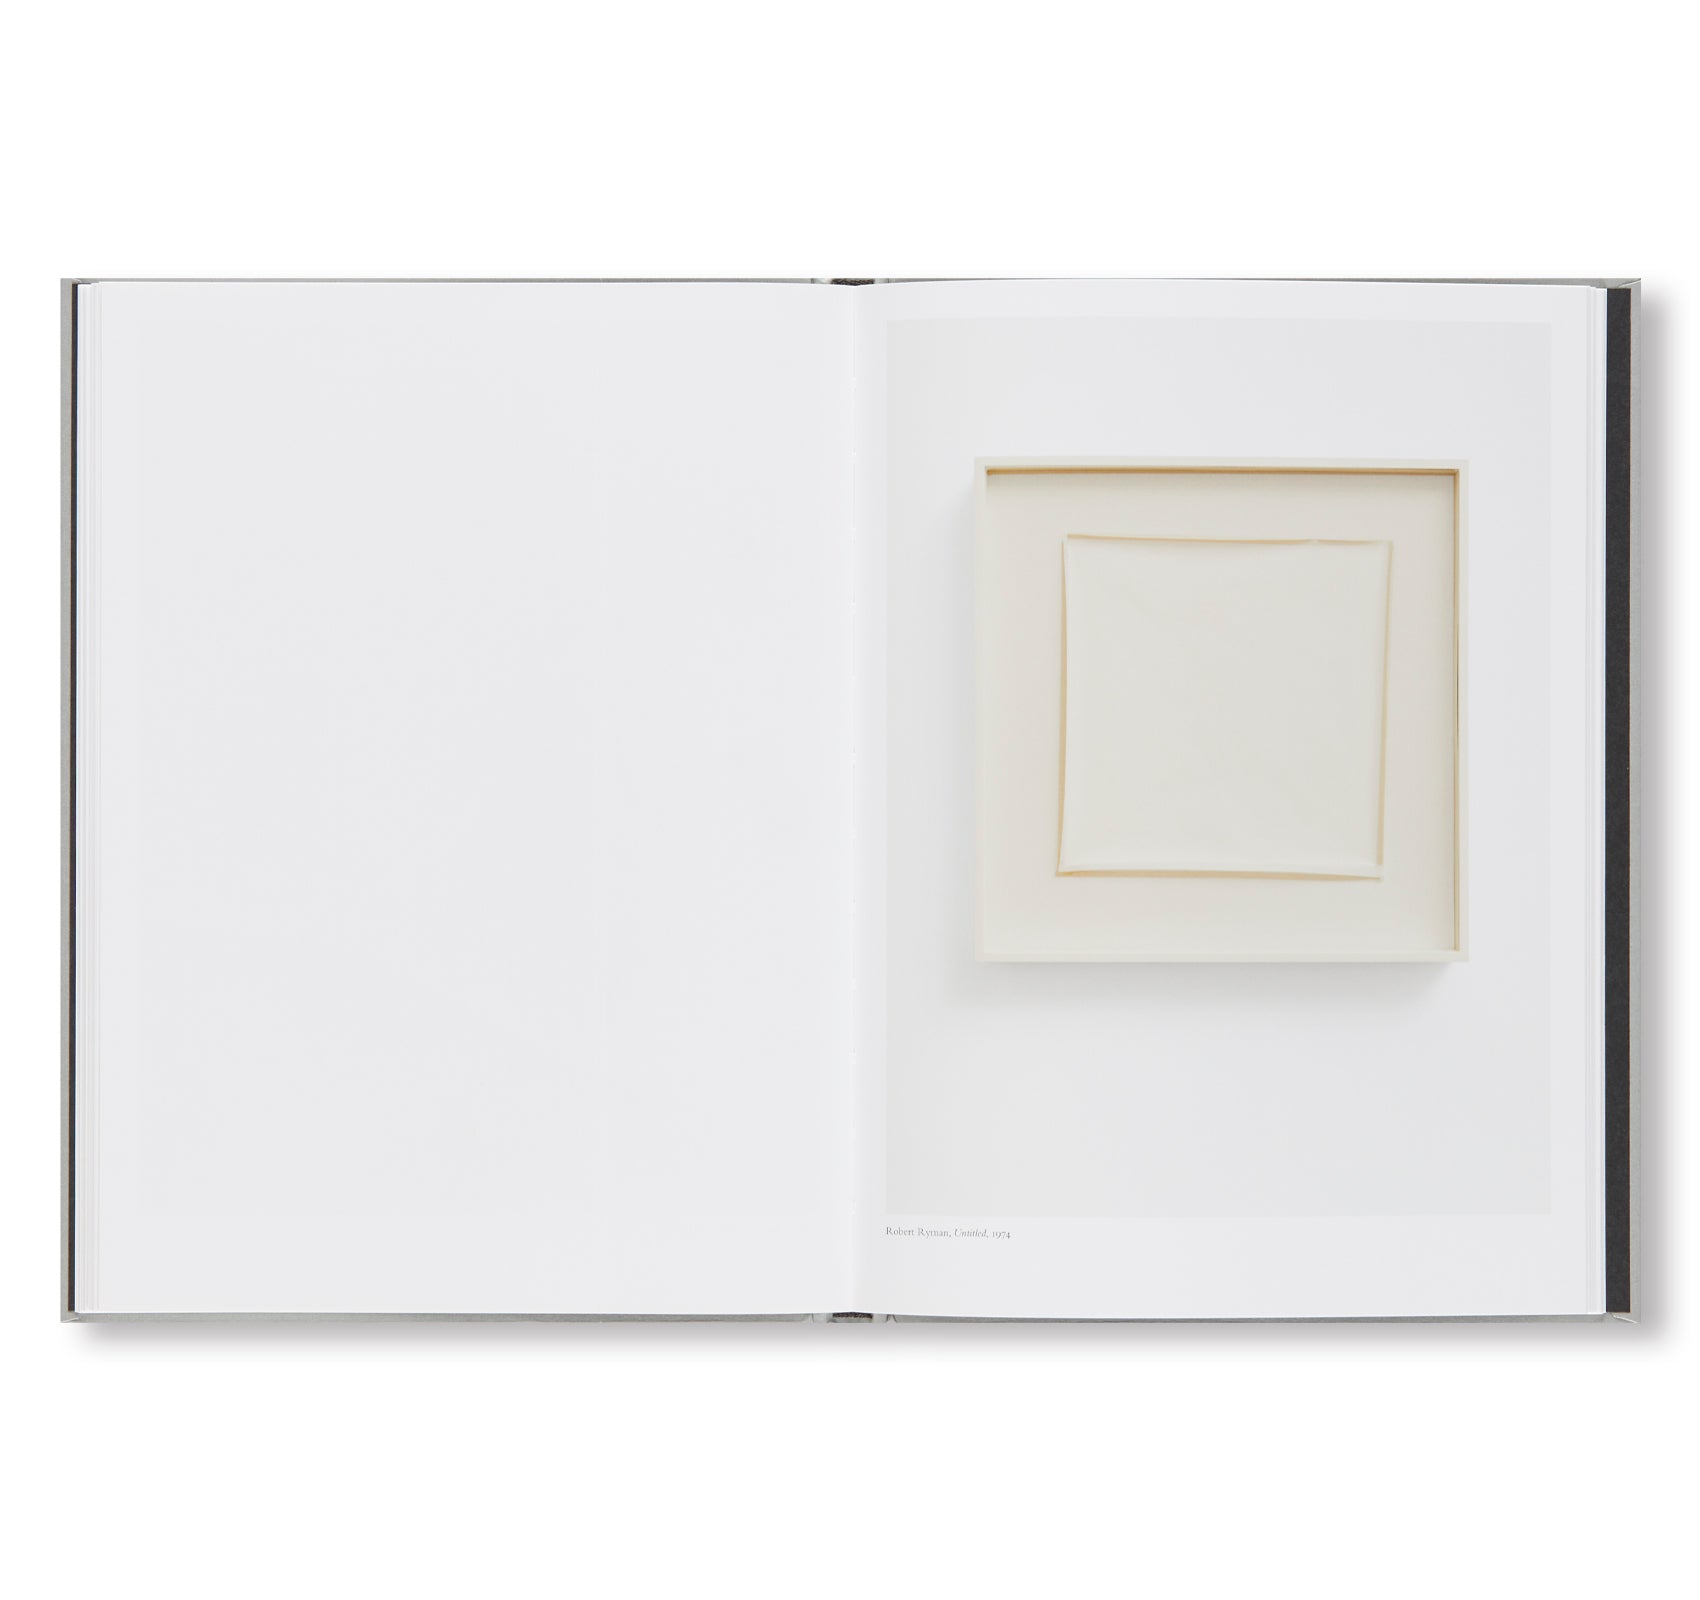 MINIMAL ART: FROM THE MARZONA COLLECTION